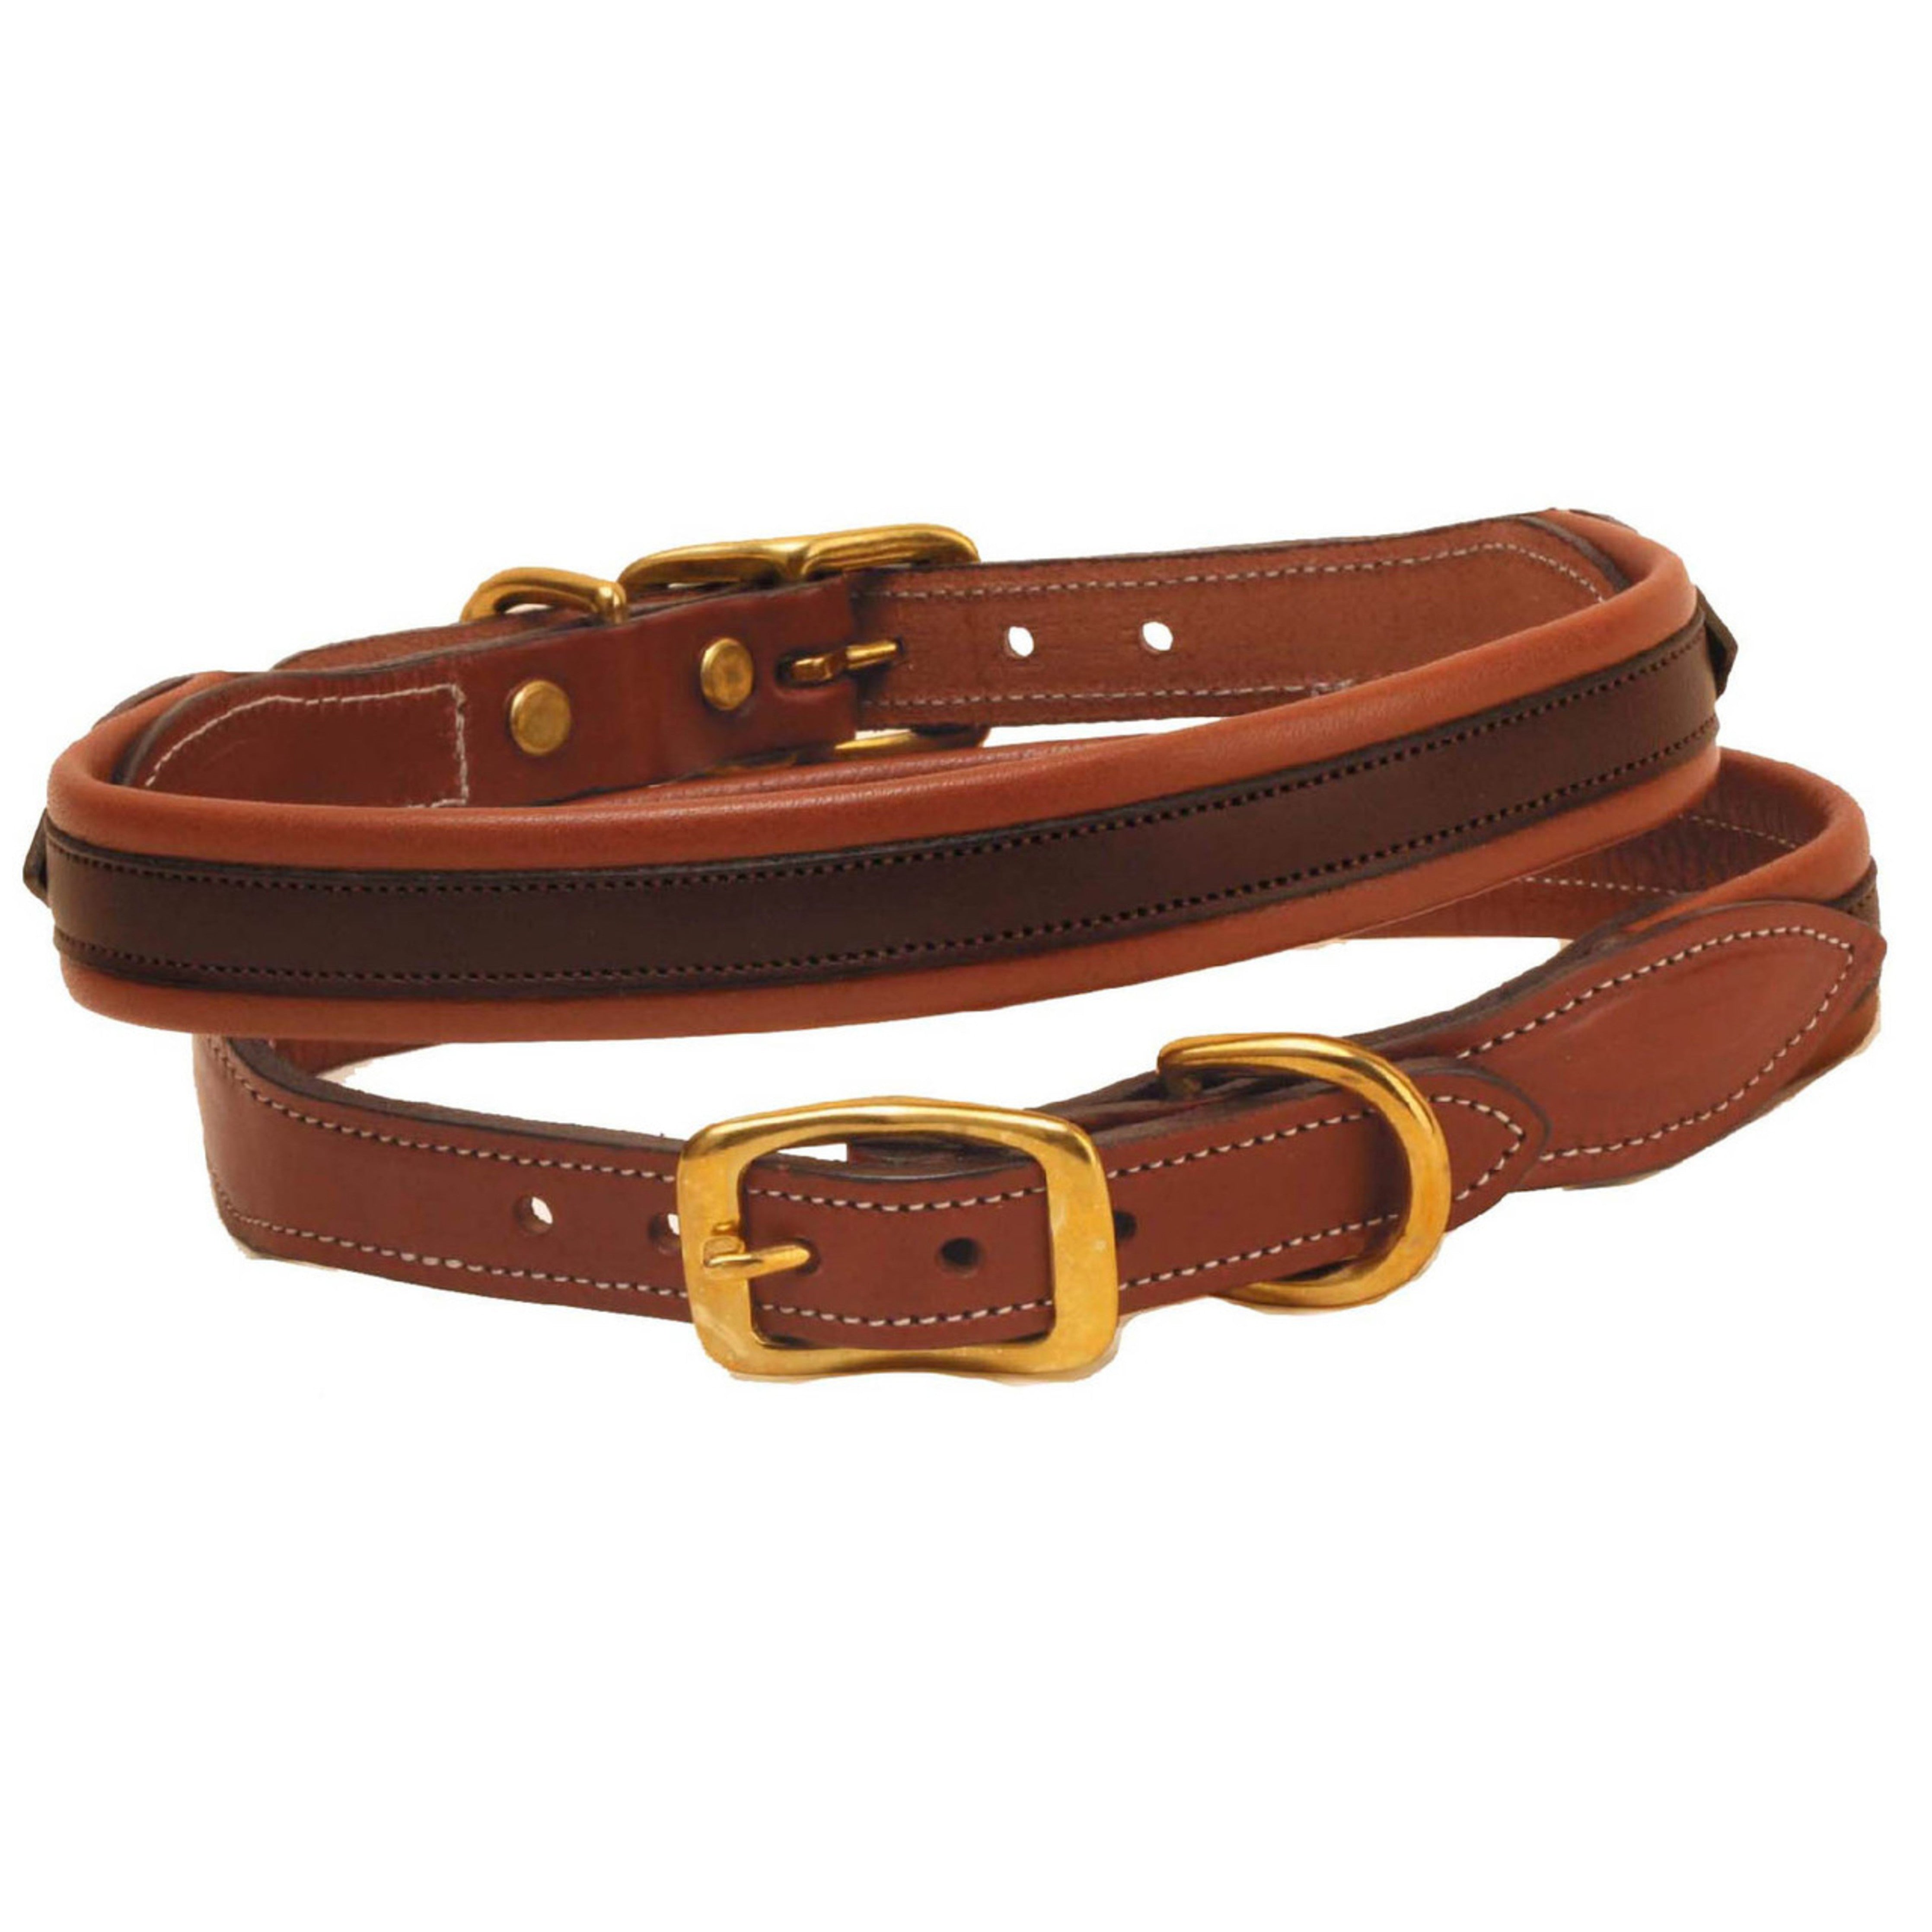 Tory Leather Dog Collar Soft Padded